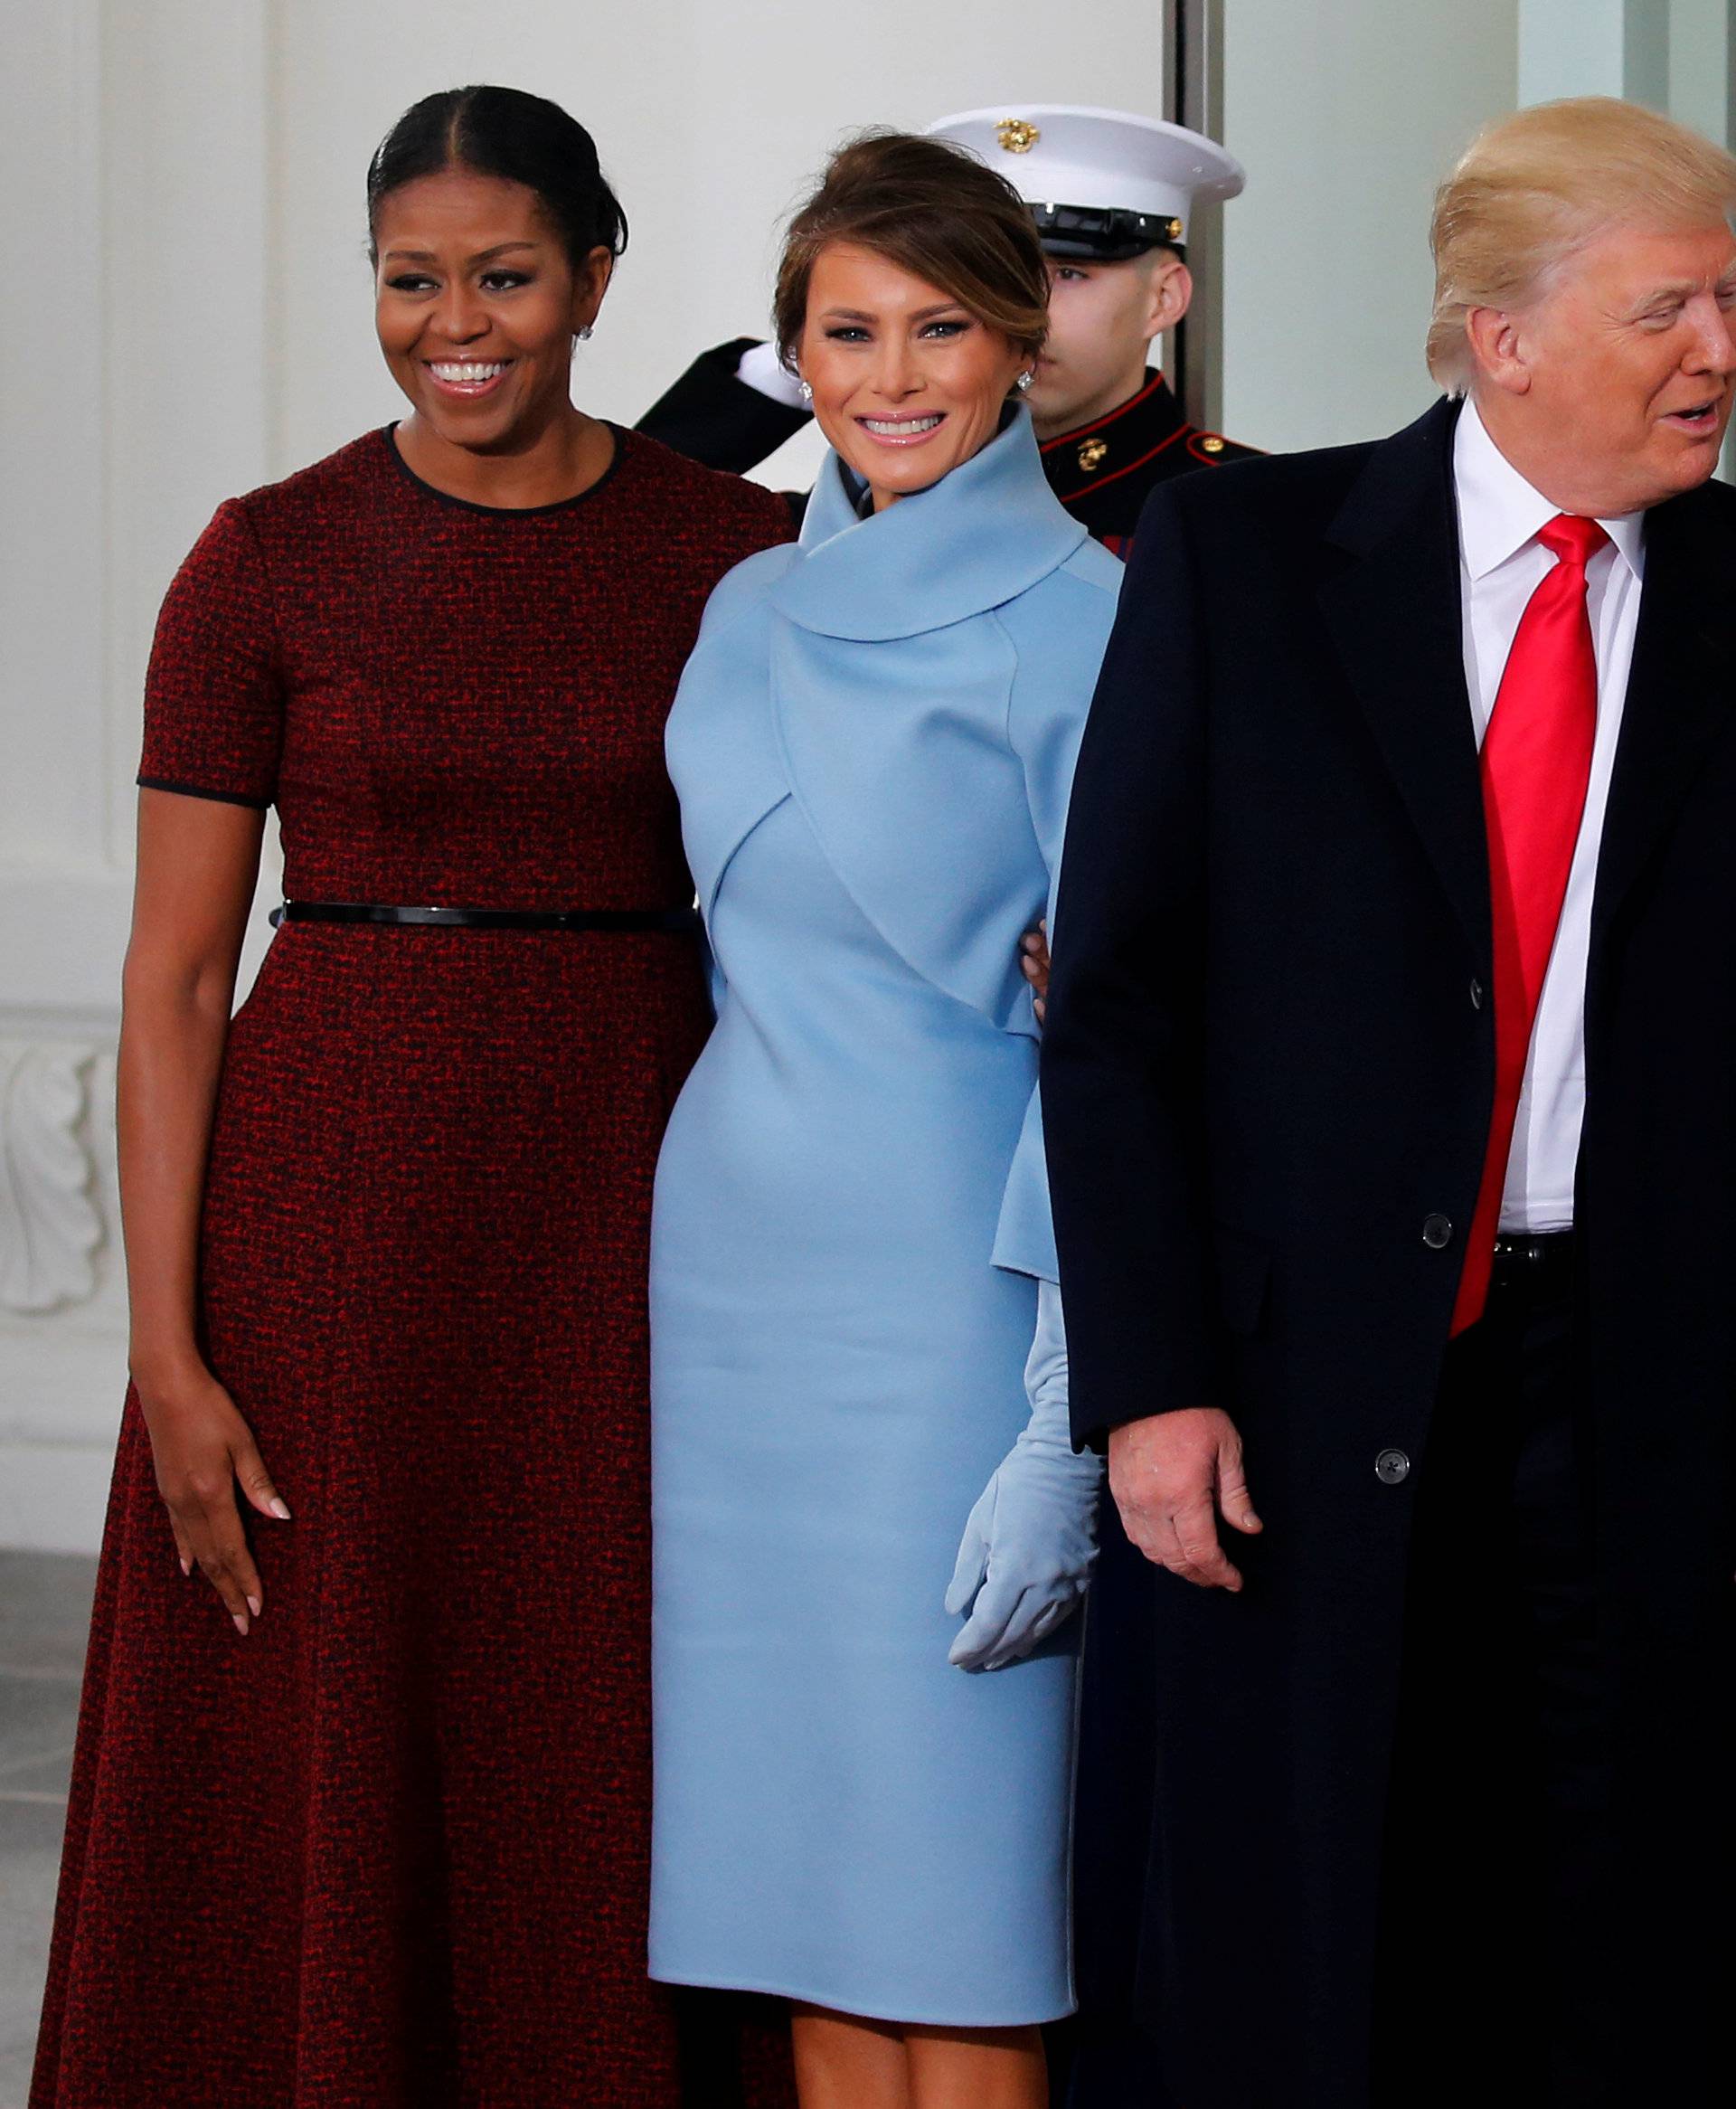 The Obamas greet the Trumps for tea before the inauguration at the White House in Washington